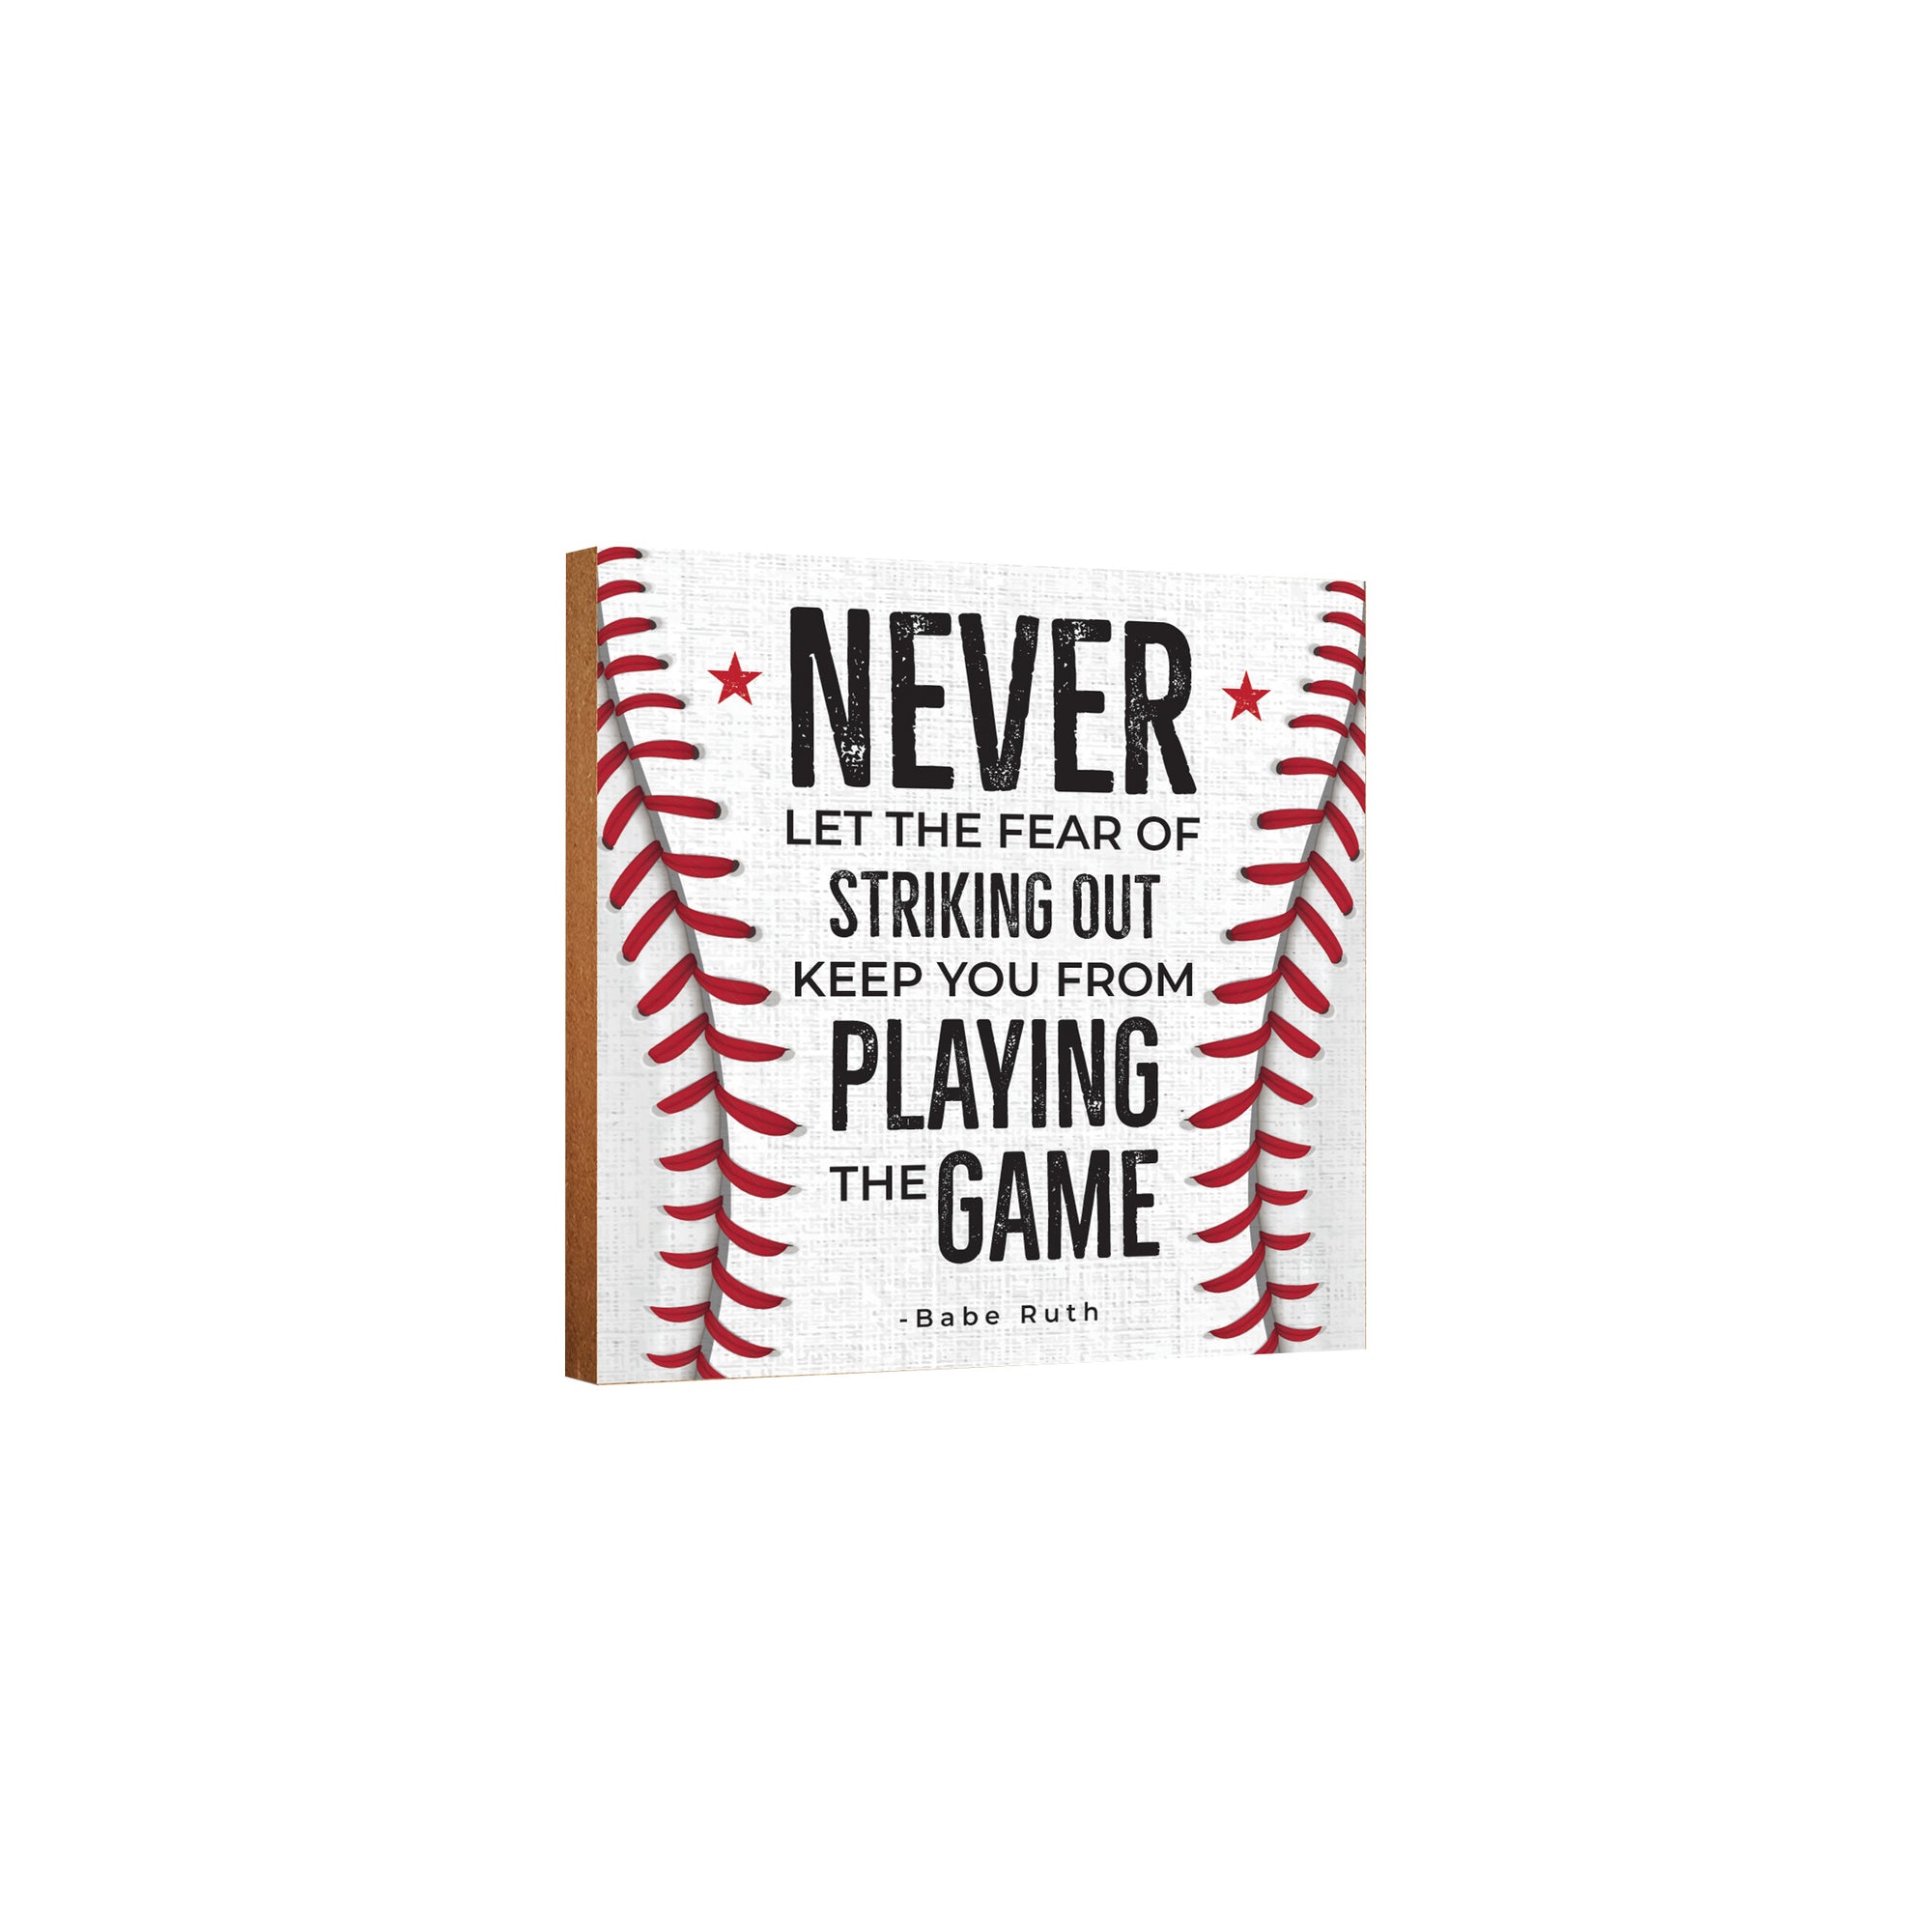 Rustic Wooden Baseball Shadow Box Shelf Décor With Inspiring Bible Verses - Never Let The Fear